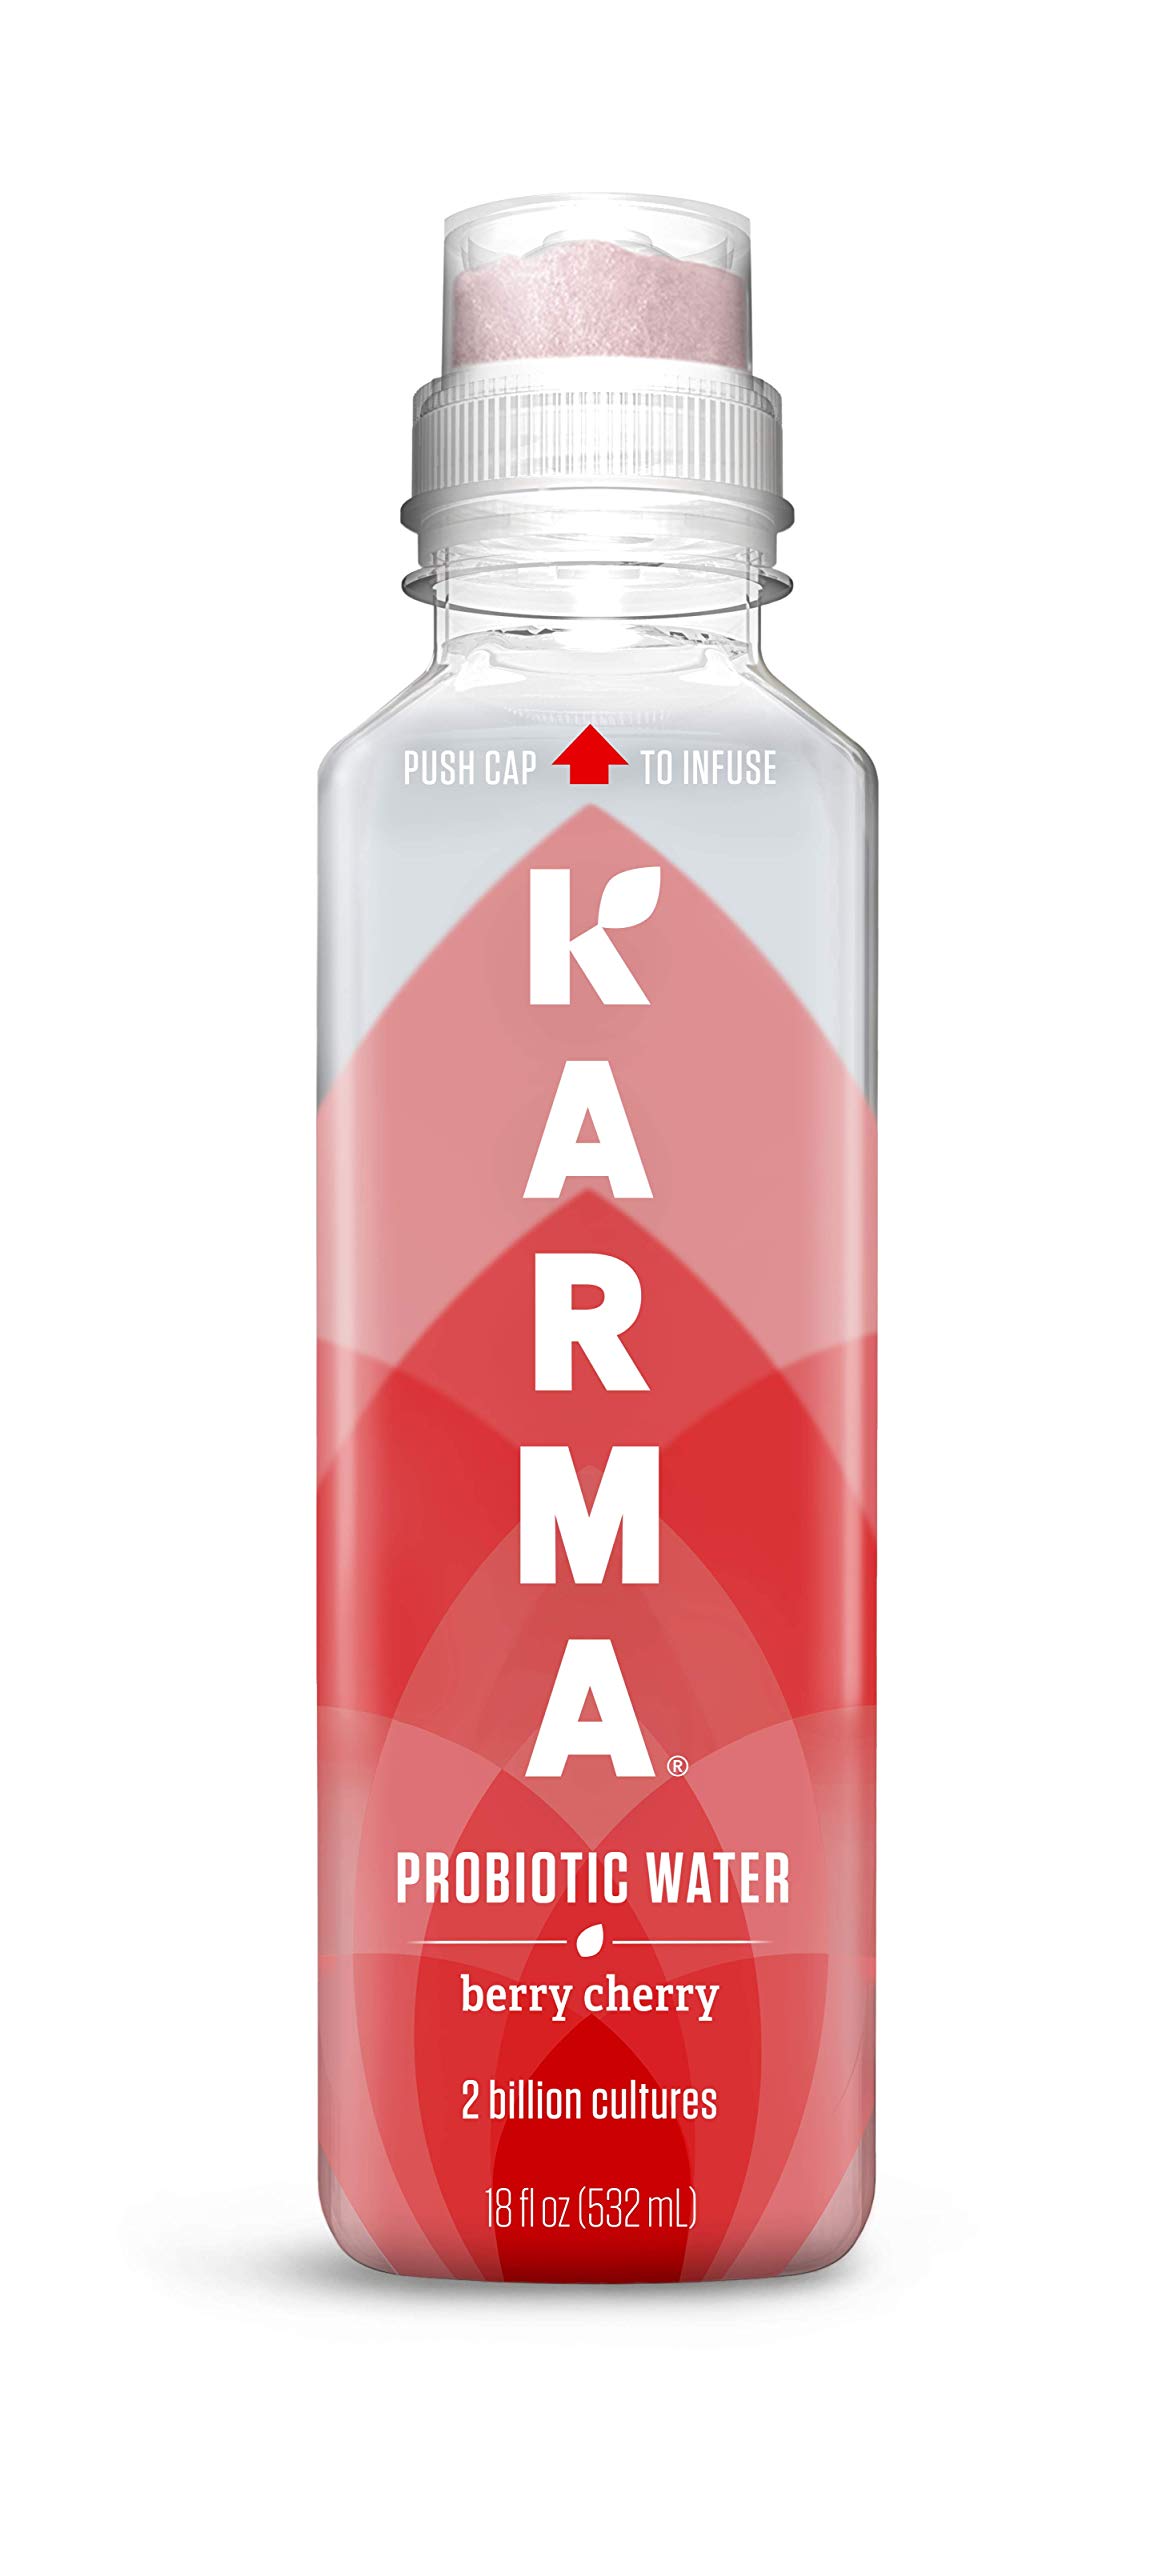 Karma Wellness Water Wellness Flavored Probiotic Water, Berry Cherry, Immunity and Digestive Health Support, Low Calorie, 2 Billion Active Cultures...